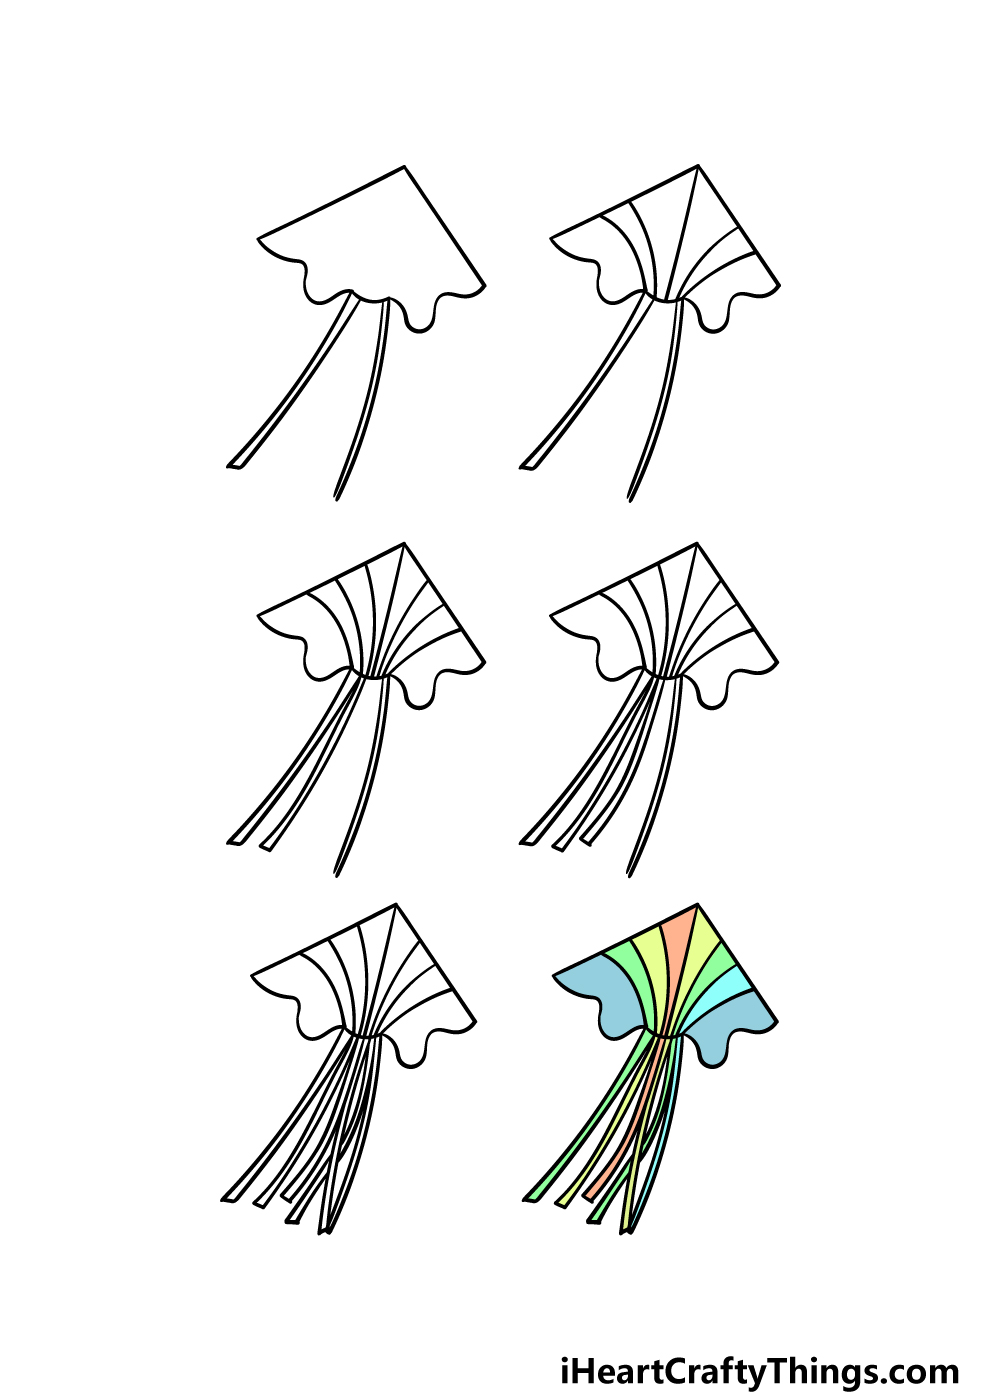 how to draw a kite in 6 steps